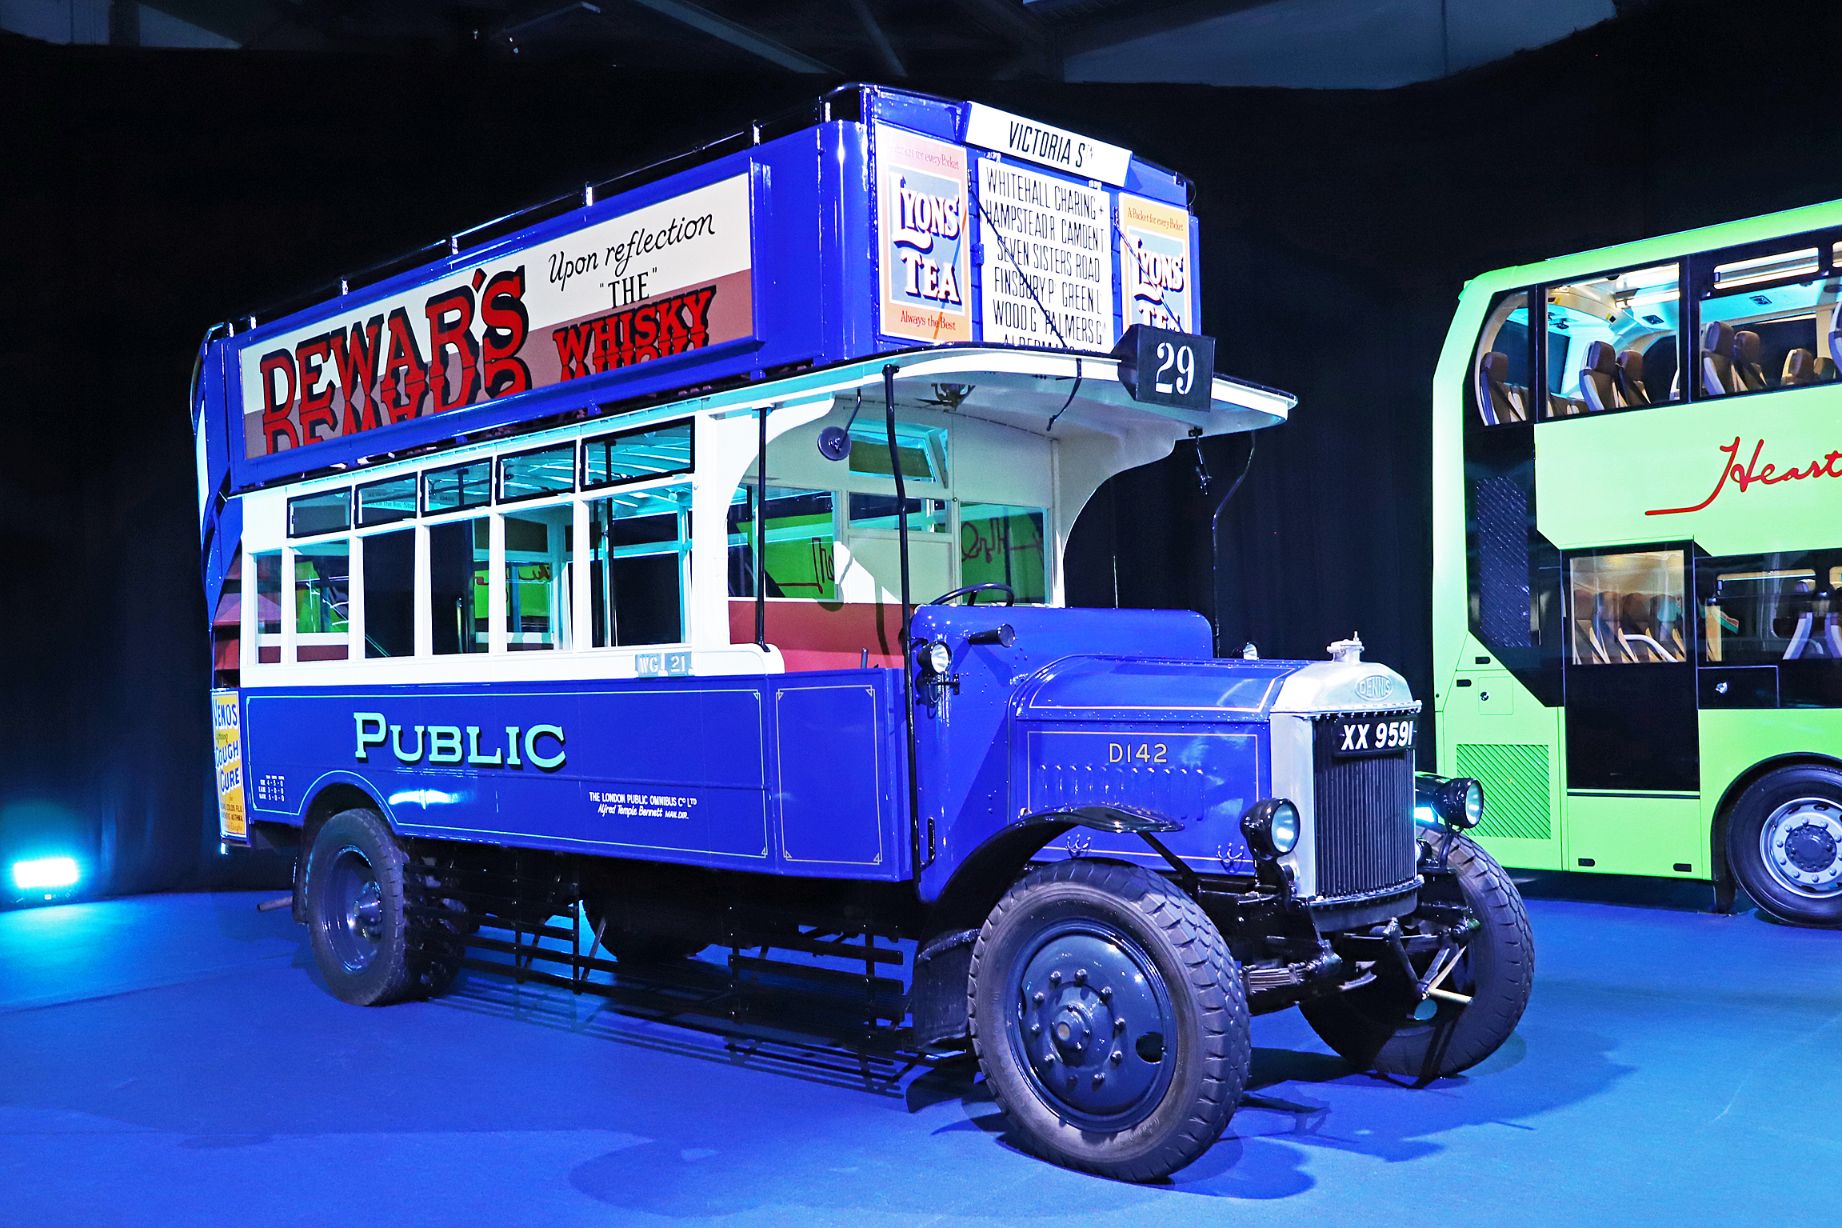 Giving some perspective on how far bus design has come, a 1925 Dennis double-decker was shown at the launch event